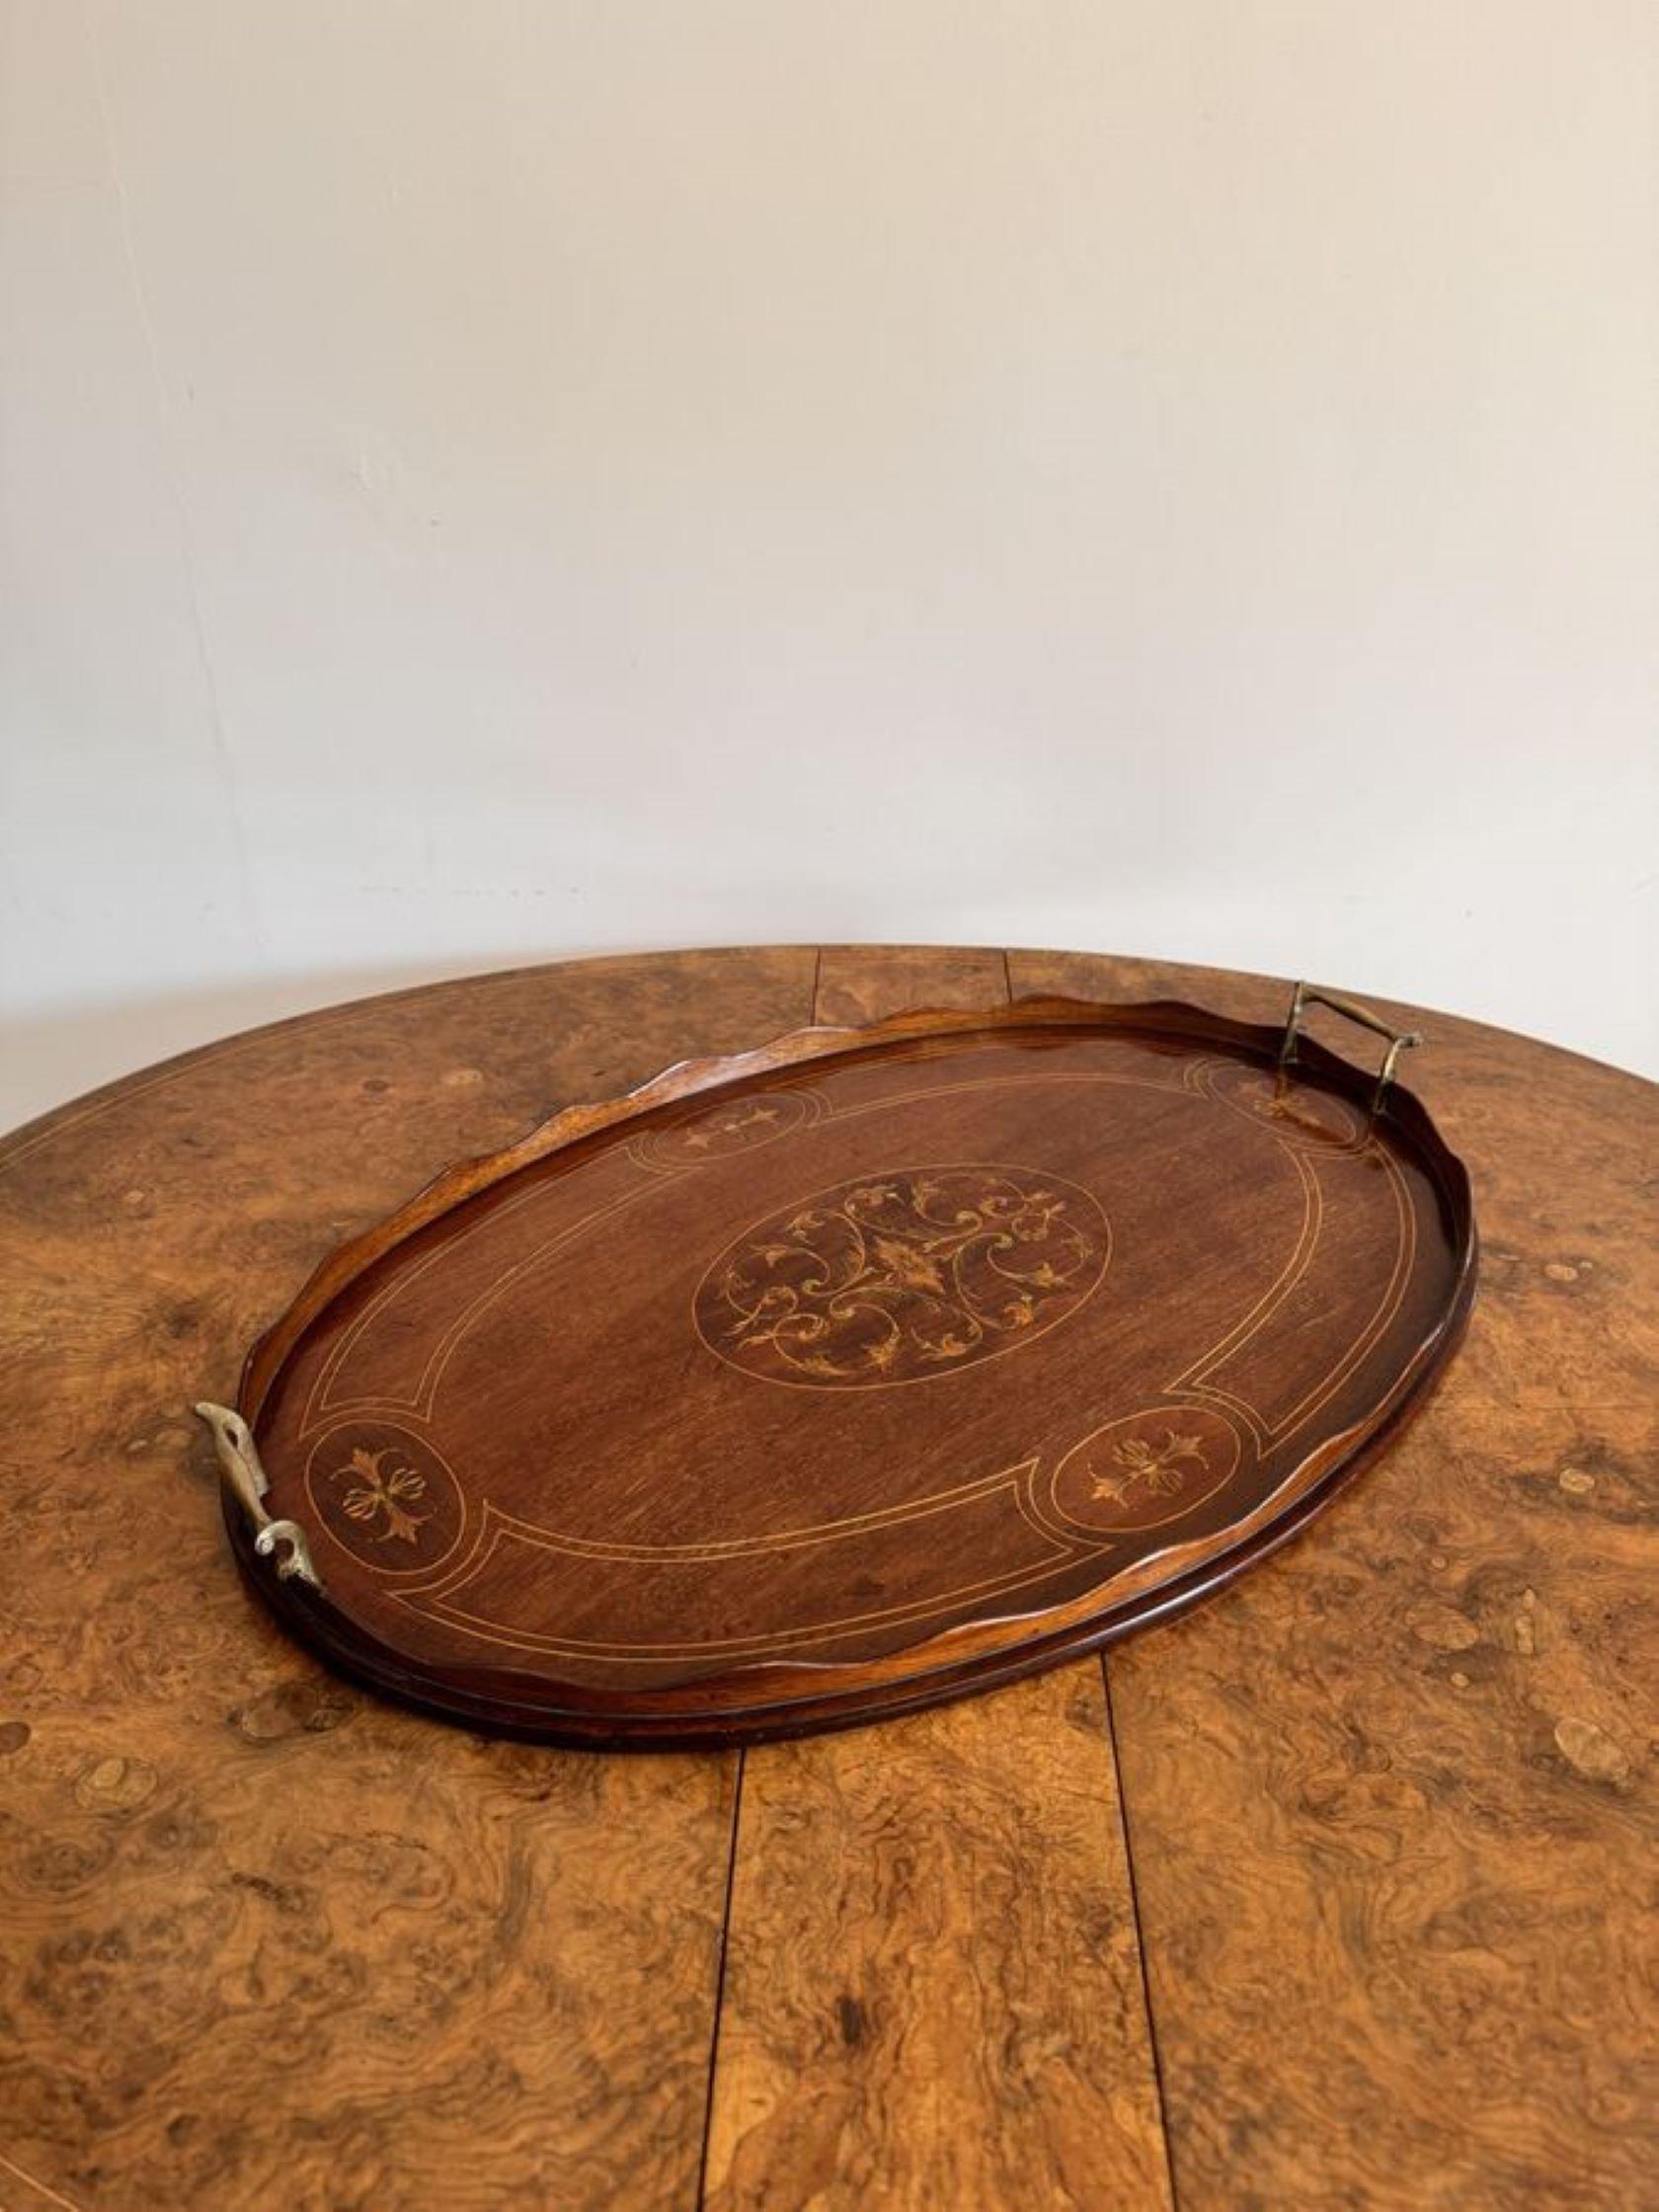 Quality antique Edwardian mahogany inlaid oval tea tray having a quality antique Edwardian oval inlaid mahogany tea tray with wonderful inlay to the centre of the tray with a wavy gallery edge and original brass carrying handles to both sides.

D.